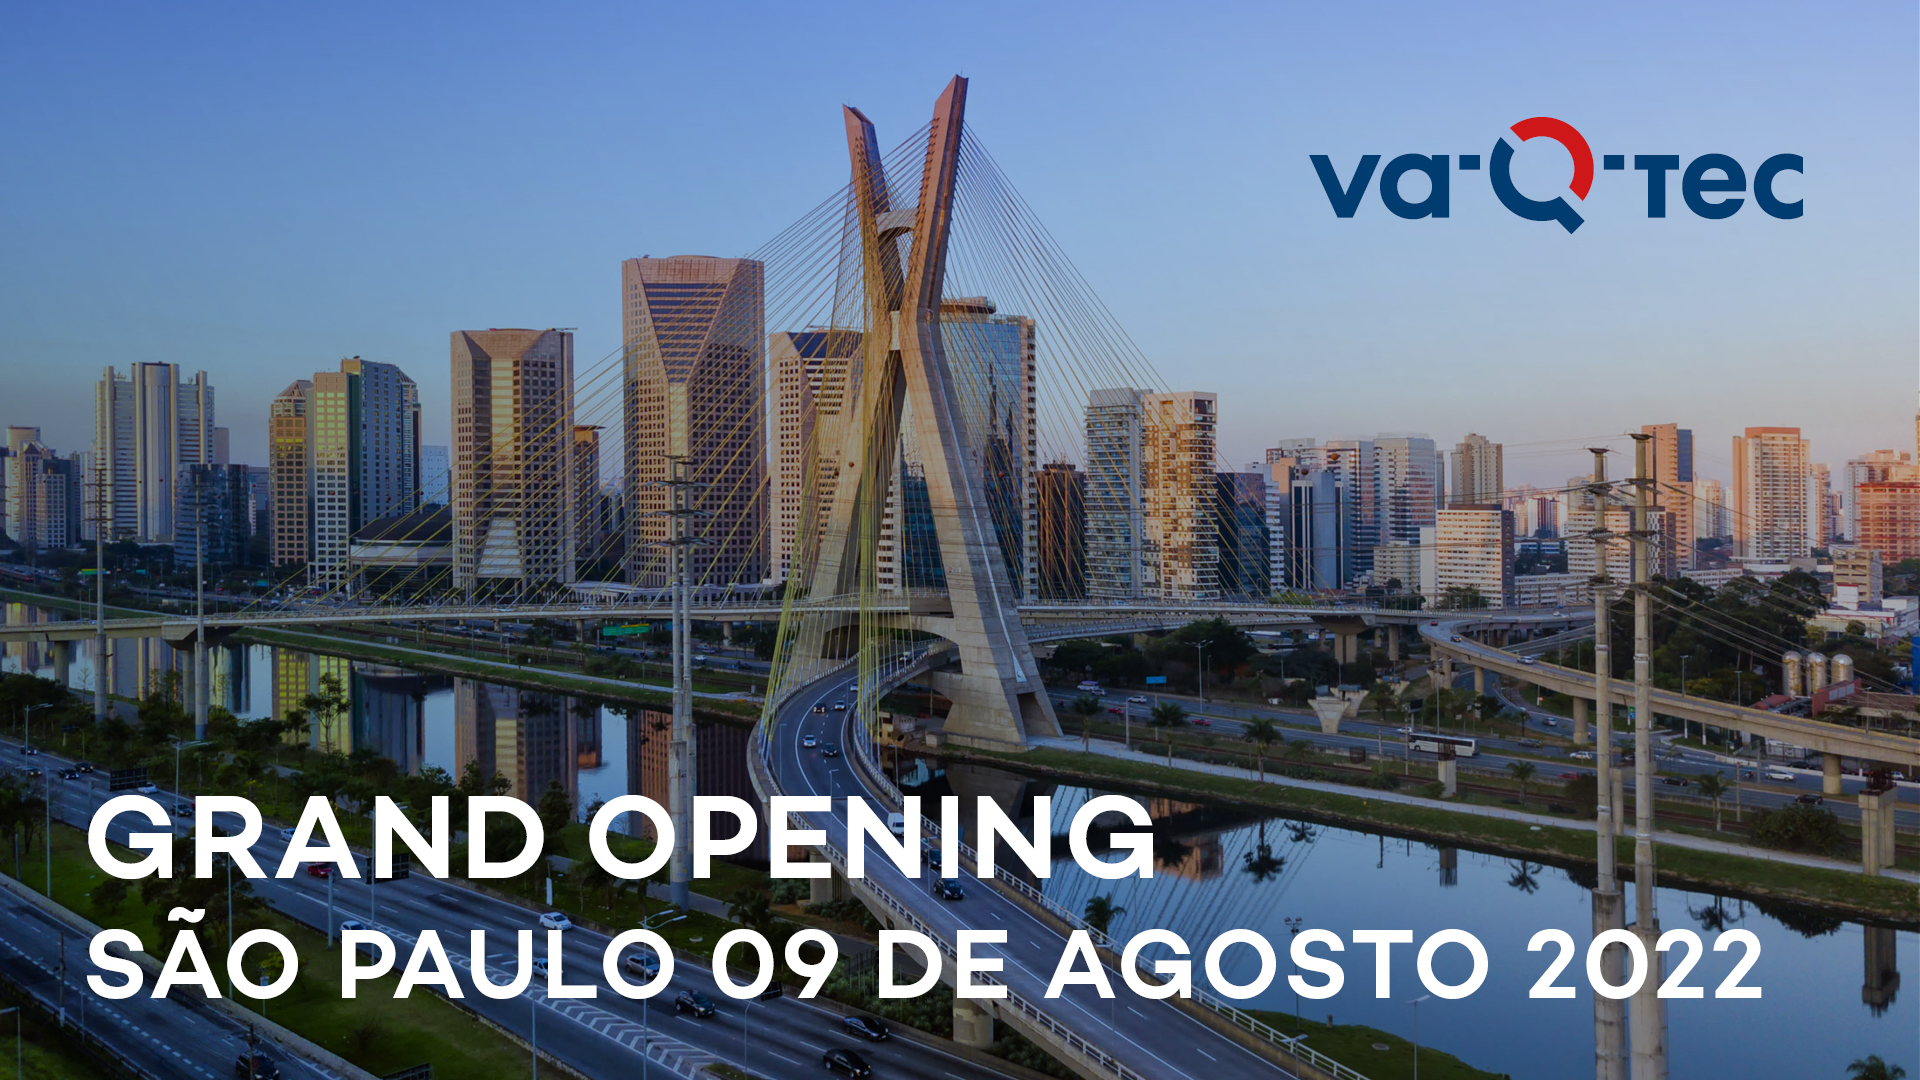 Grand Opening va-Q-tec do Brasil: Opening ceremony of the office and TempChain Service Center in São Paulo